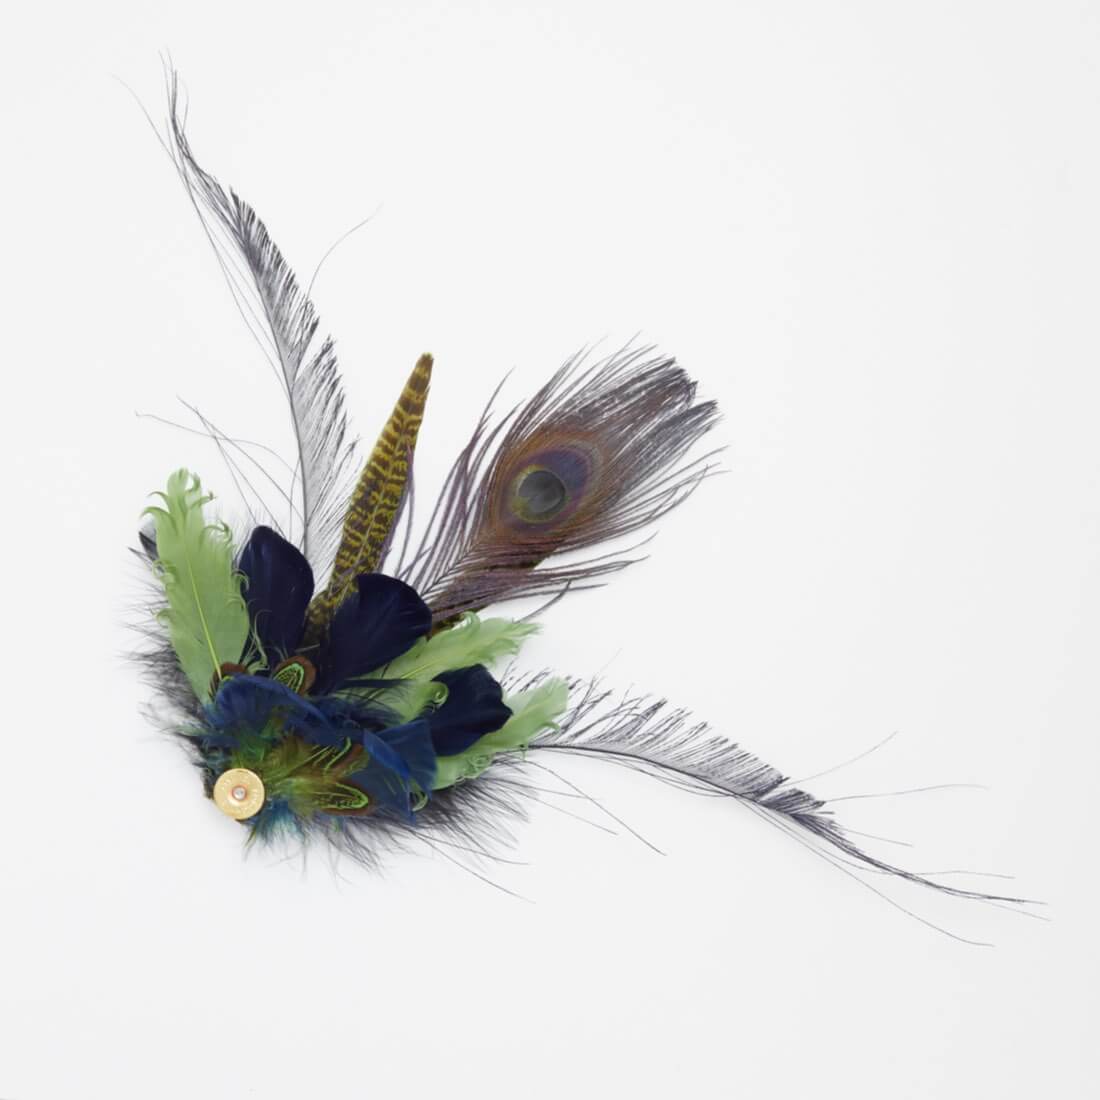 Thea Green Fedora Hat with Feathers - Grace and Dotty